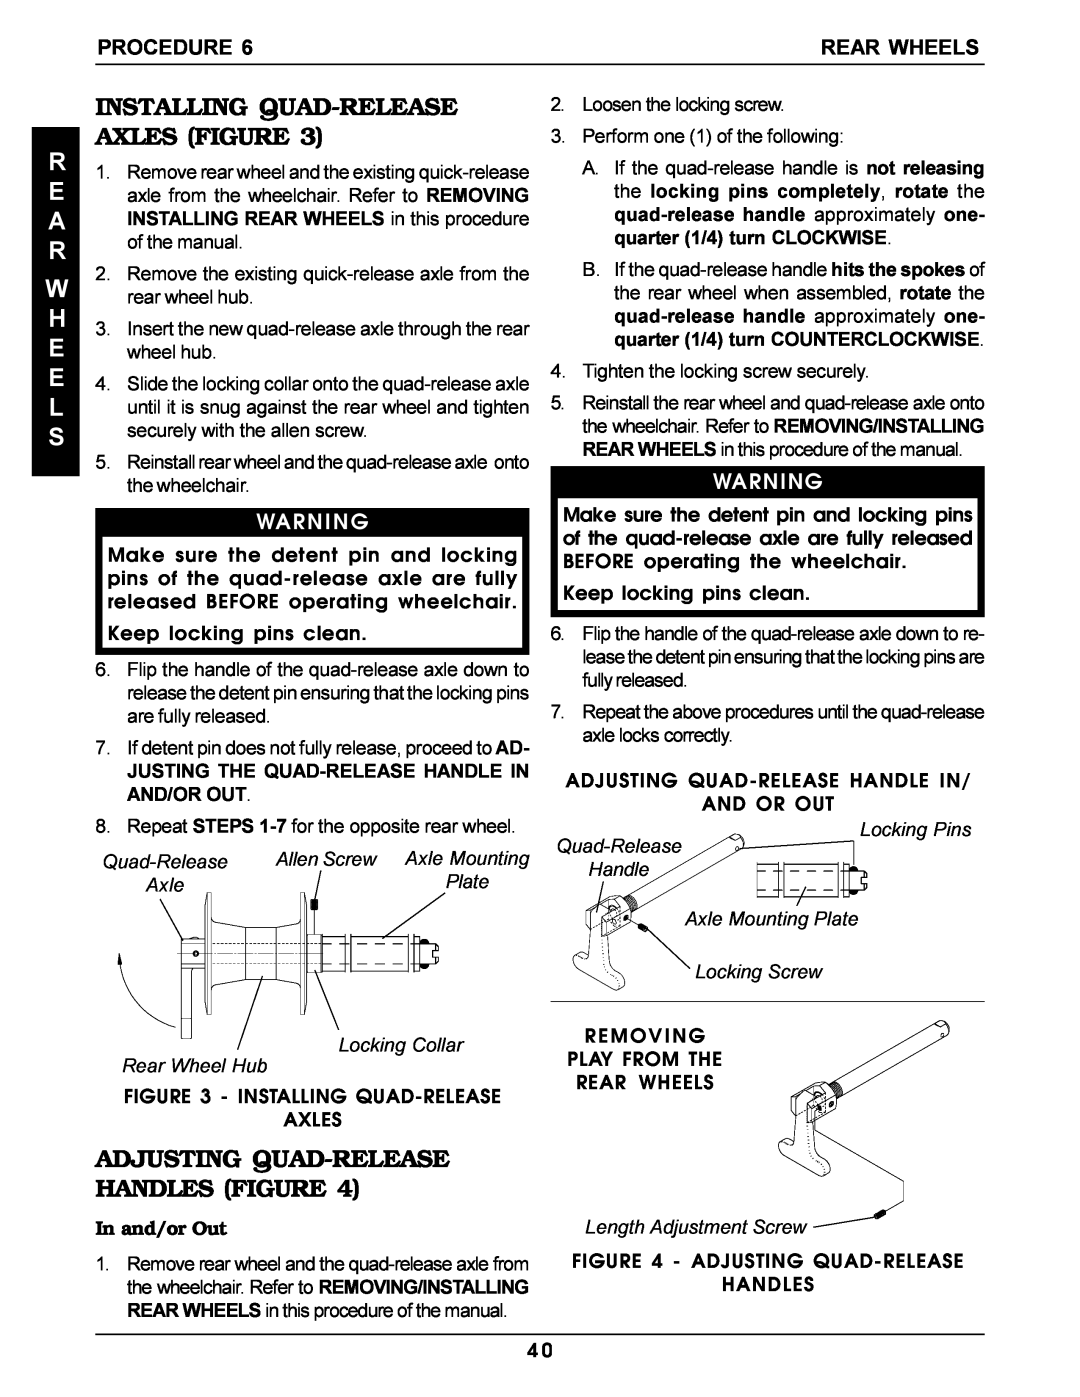 Invacare Pro Series Installing Quad-Release Axles Figure, Adjusting Quad-Release Handles Figure, And/Or Out, In and/or Out 